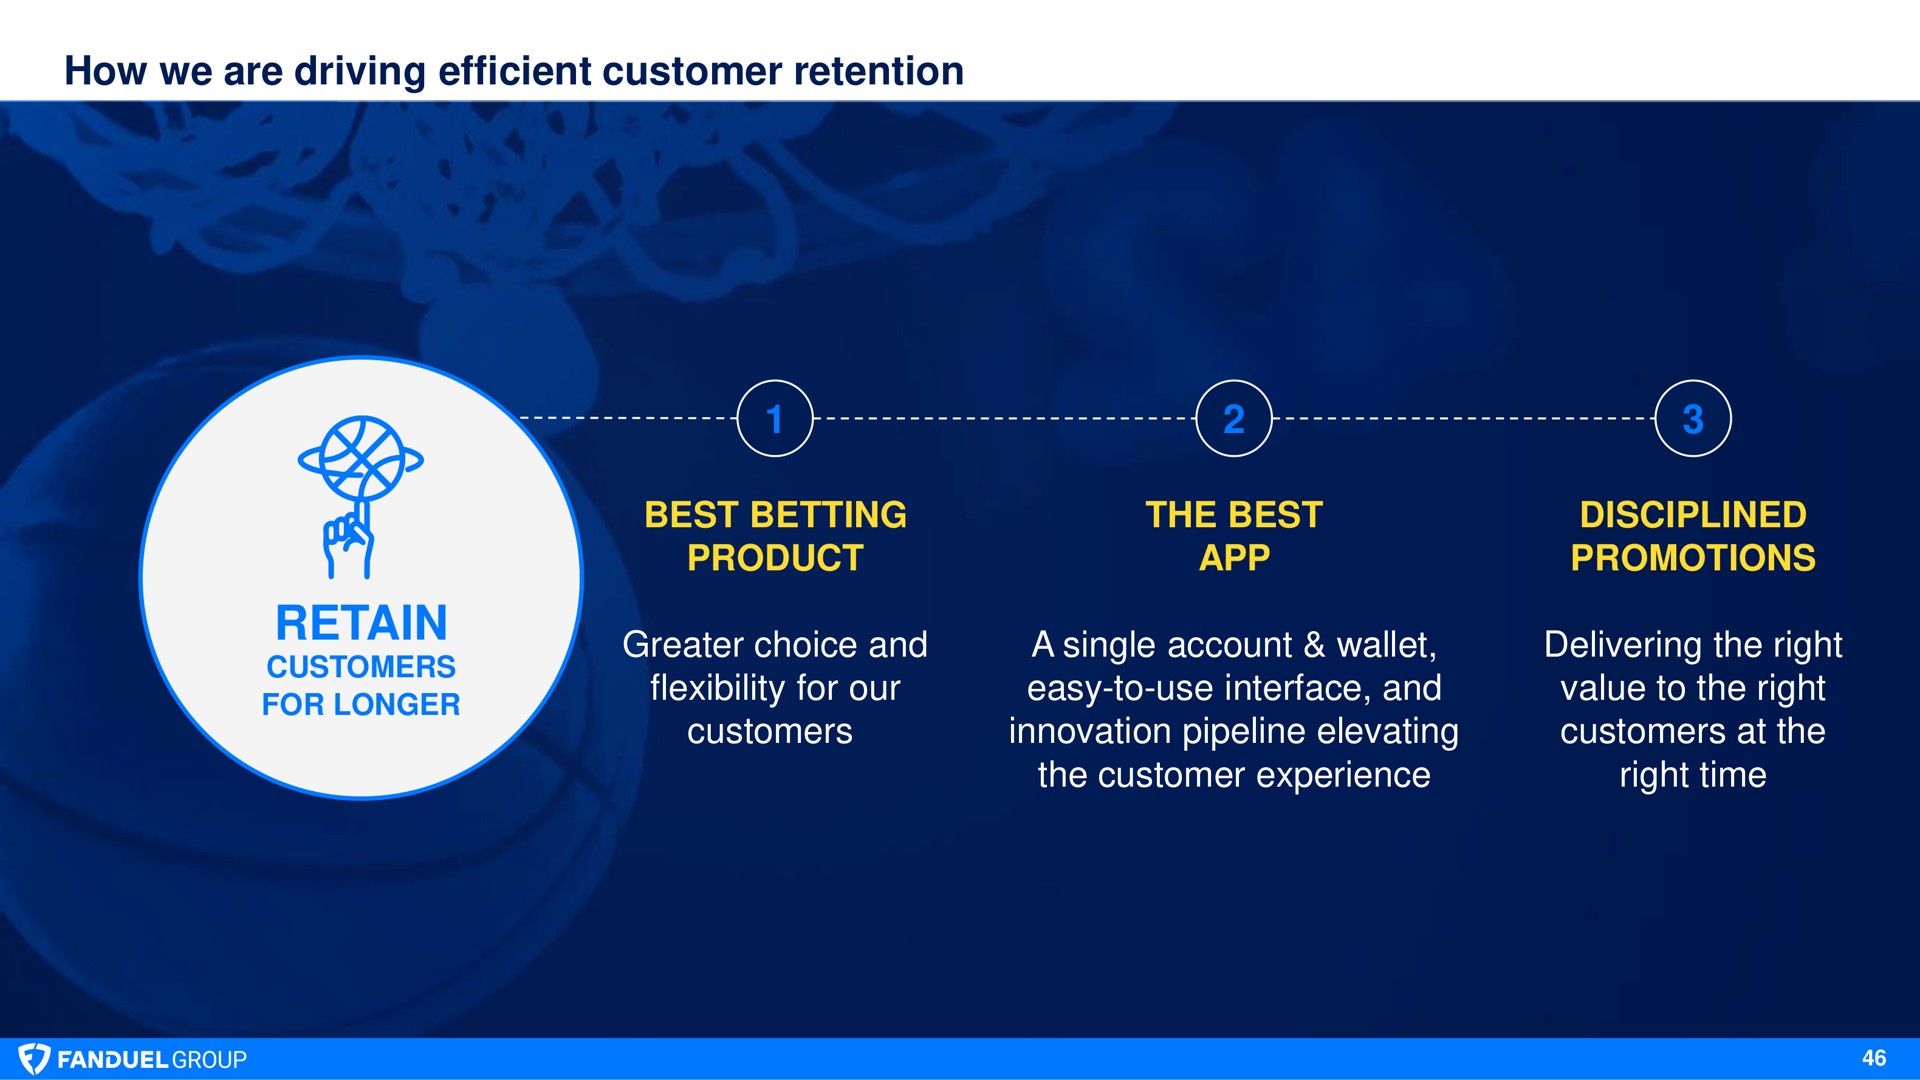 how we are driving efficient customer retention best betting product greater choice and flexibility for our customers the best disciplined promotions a single account wallet easy to use interface and innovation pipeline elevating the customer experience delivering the right value to the right customers at the right time retain | Flutter